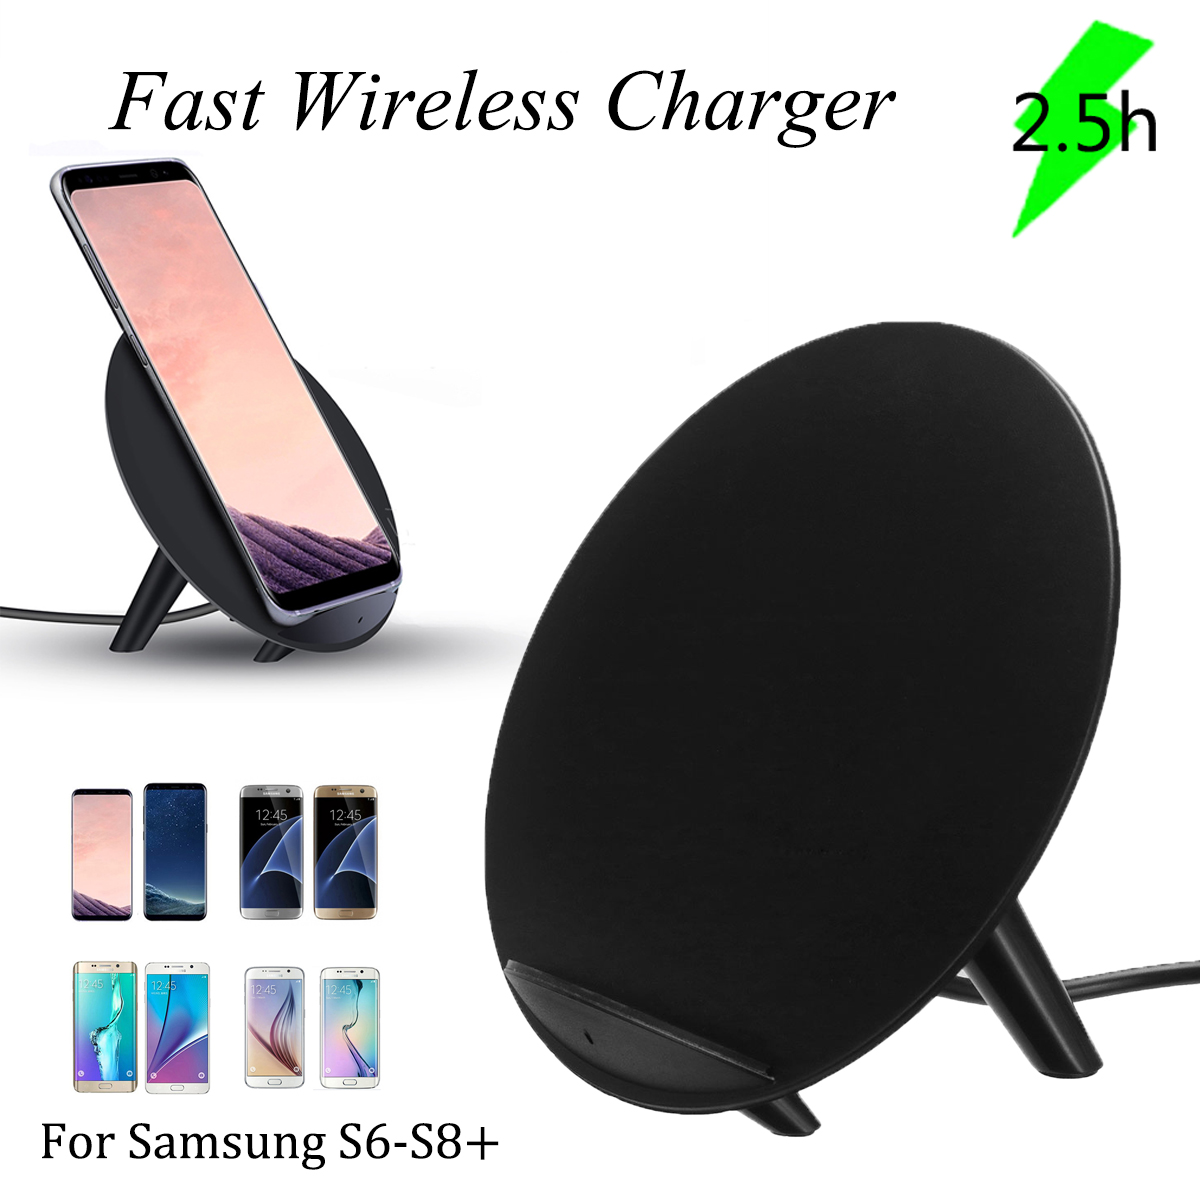 K10-Qi-Wireless-Fast-Desktop-Holder-Stand-Charger-for-Samsung-Galaxy-S8-S8-Edge-S7-S6-Edge-1190493-1